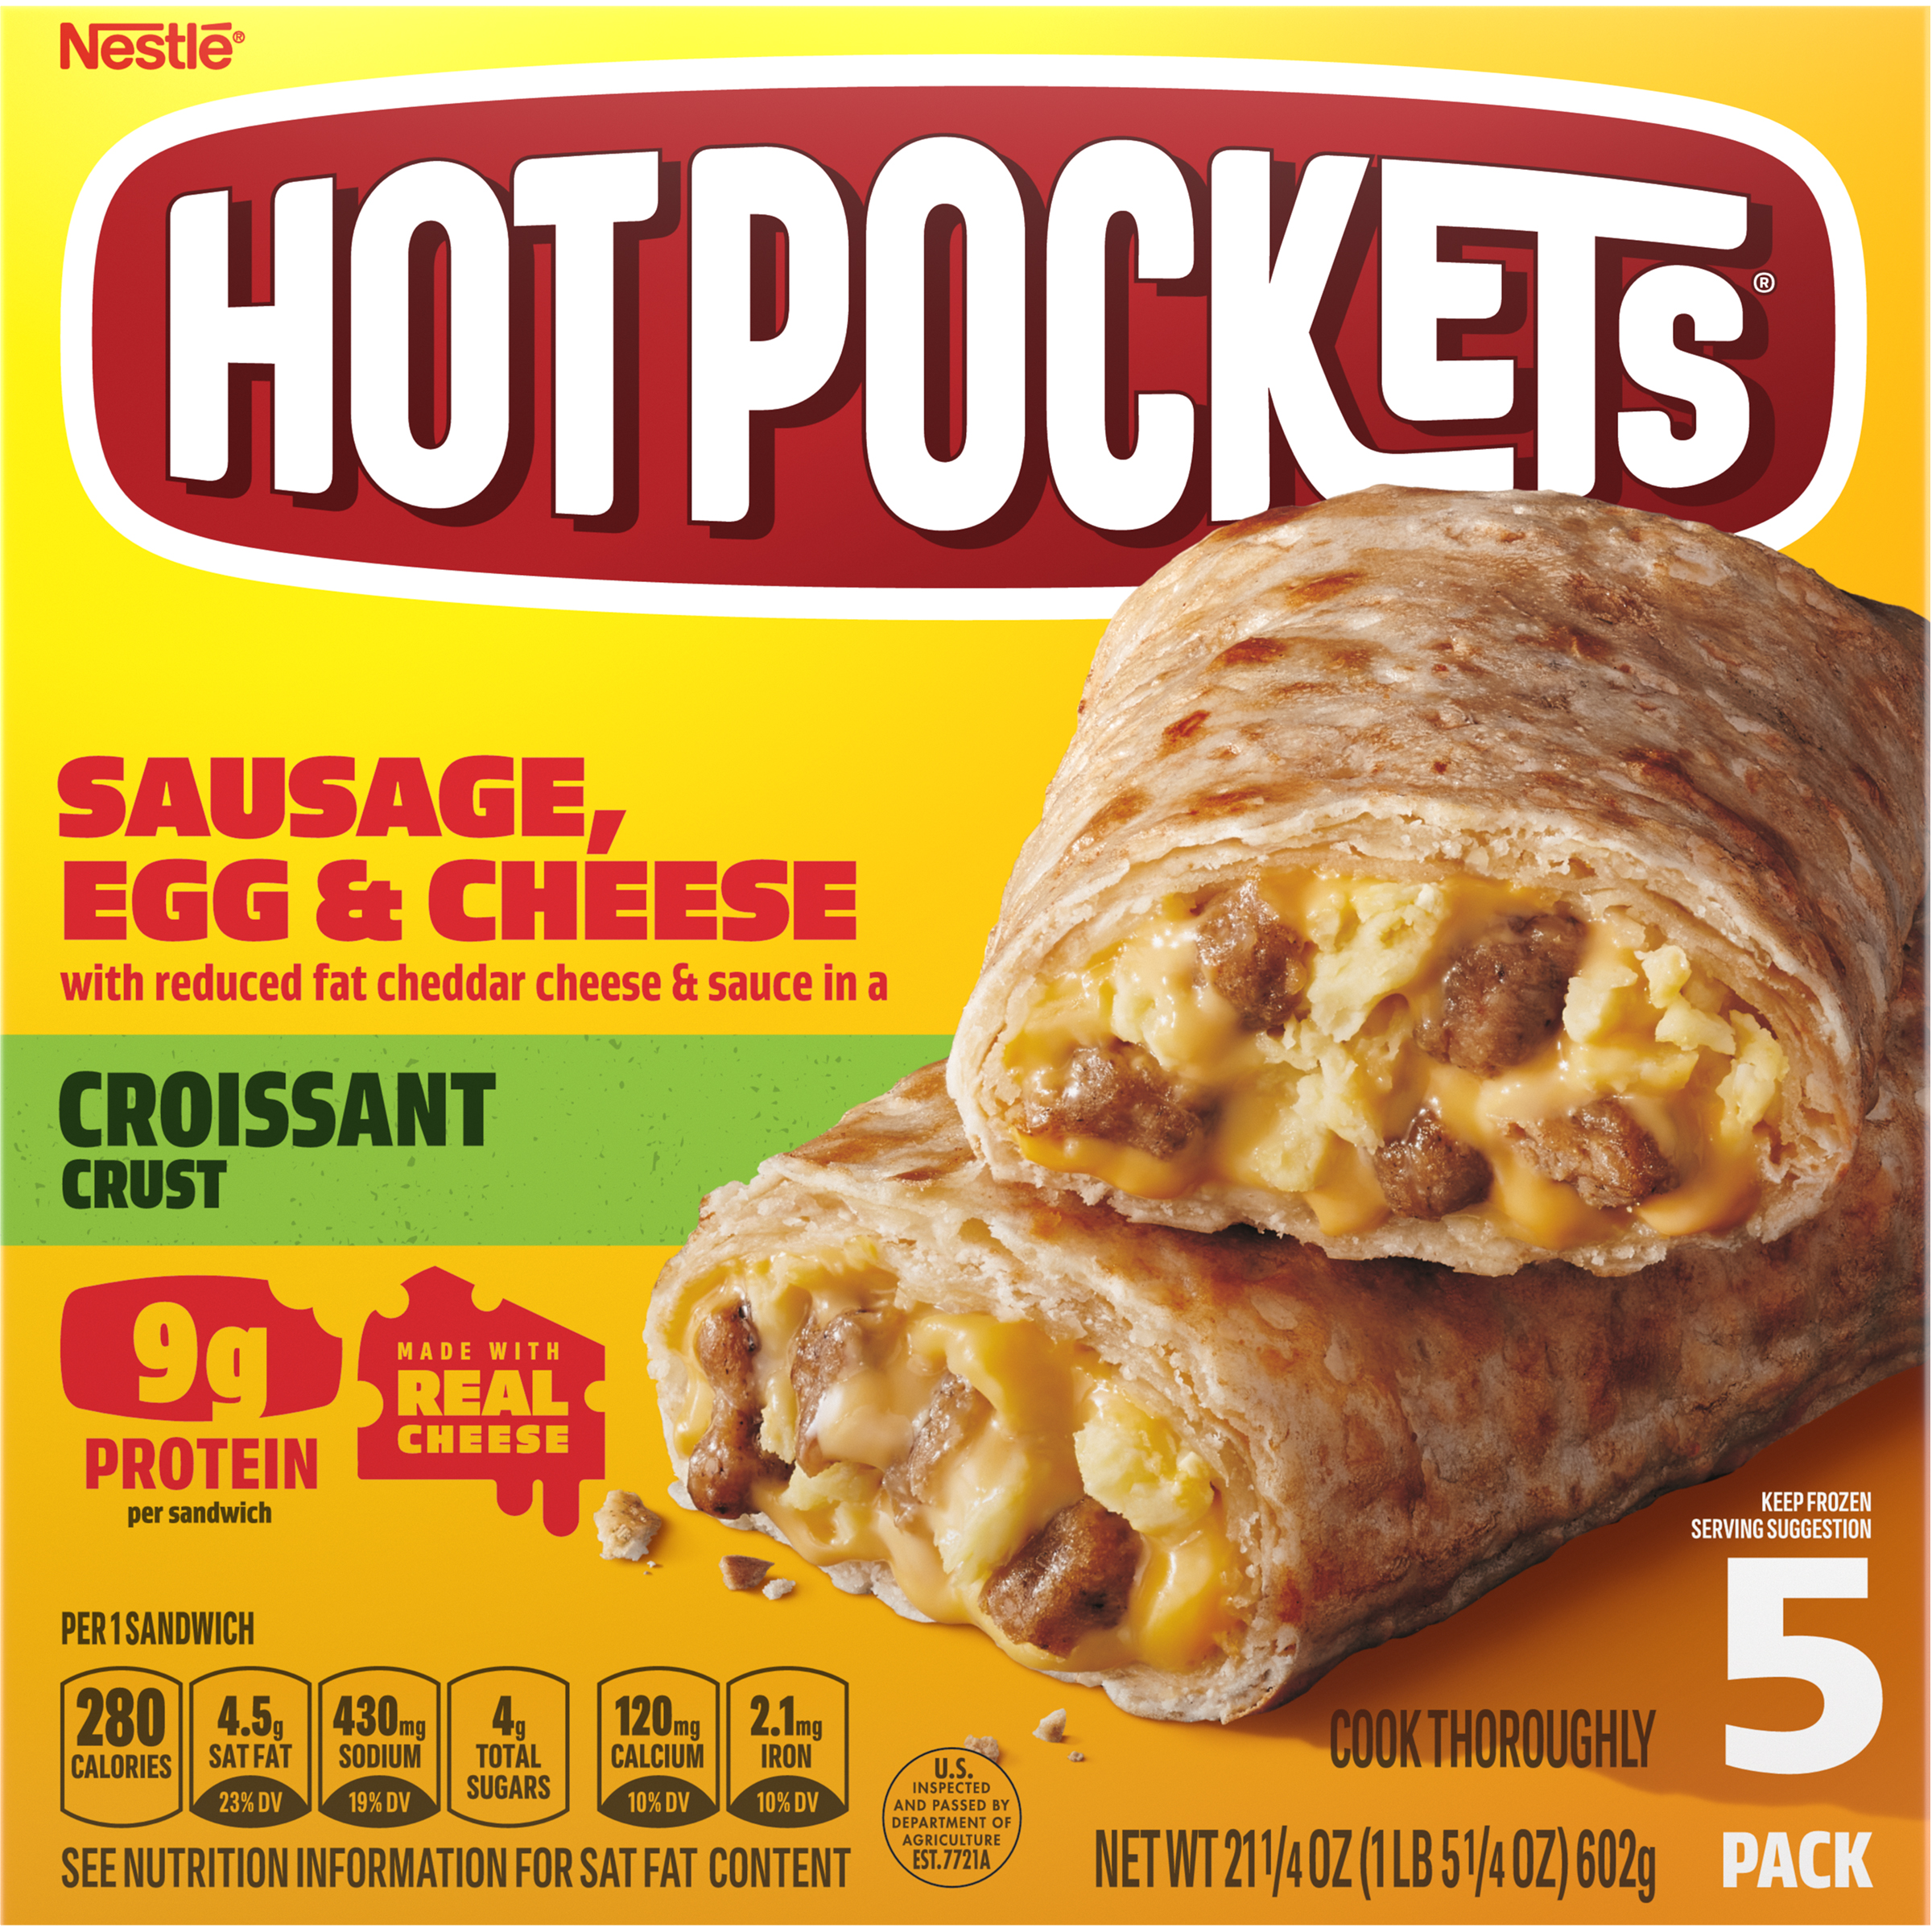 HOT POCKETS Croissant Crust Sausage, Egg, & Cheese (5 Pack) 4 units per case 21.3 oz